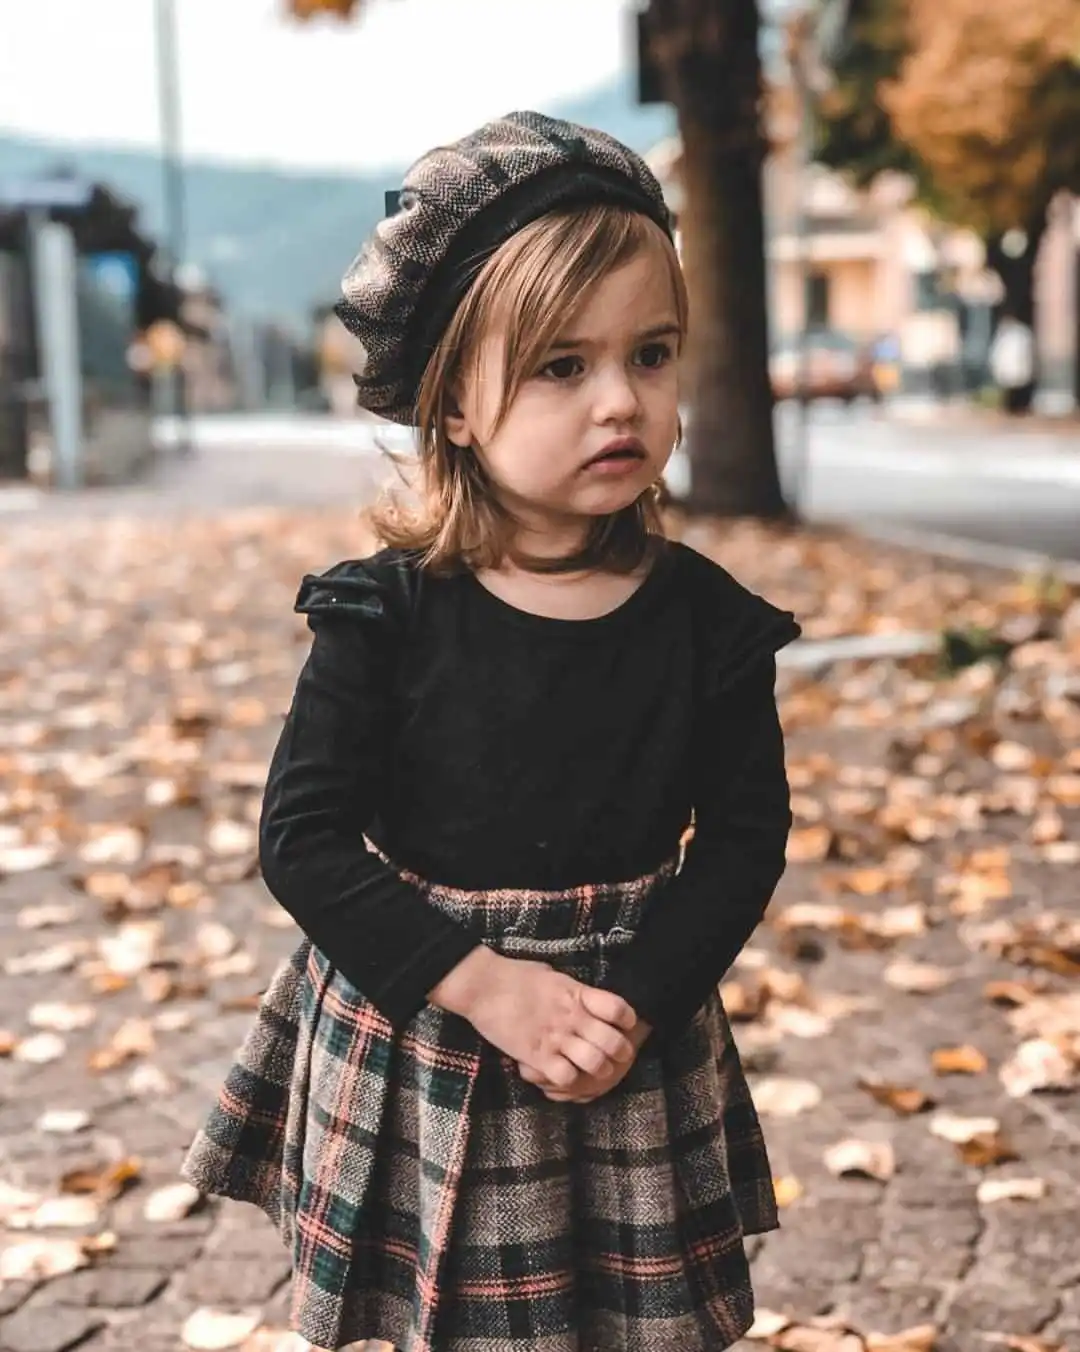 Hot sale fashion toddler dress clothing sets solid knitting shirts match plaid pleated skirt casual girls outfits with hat